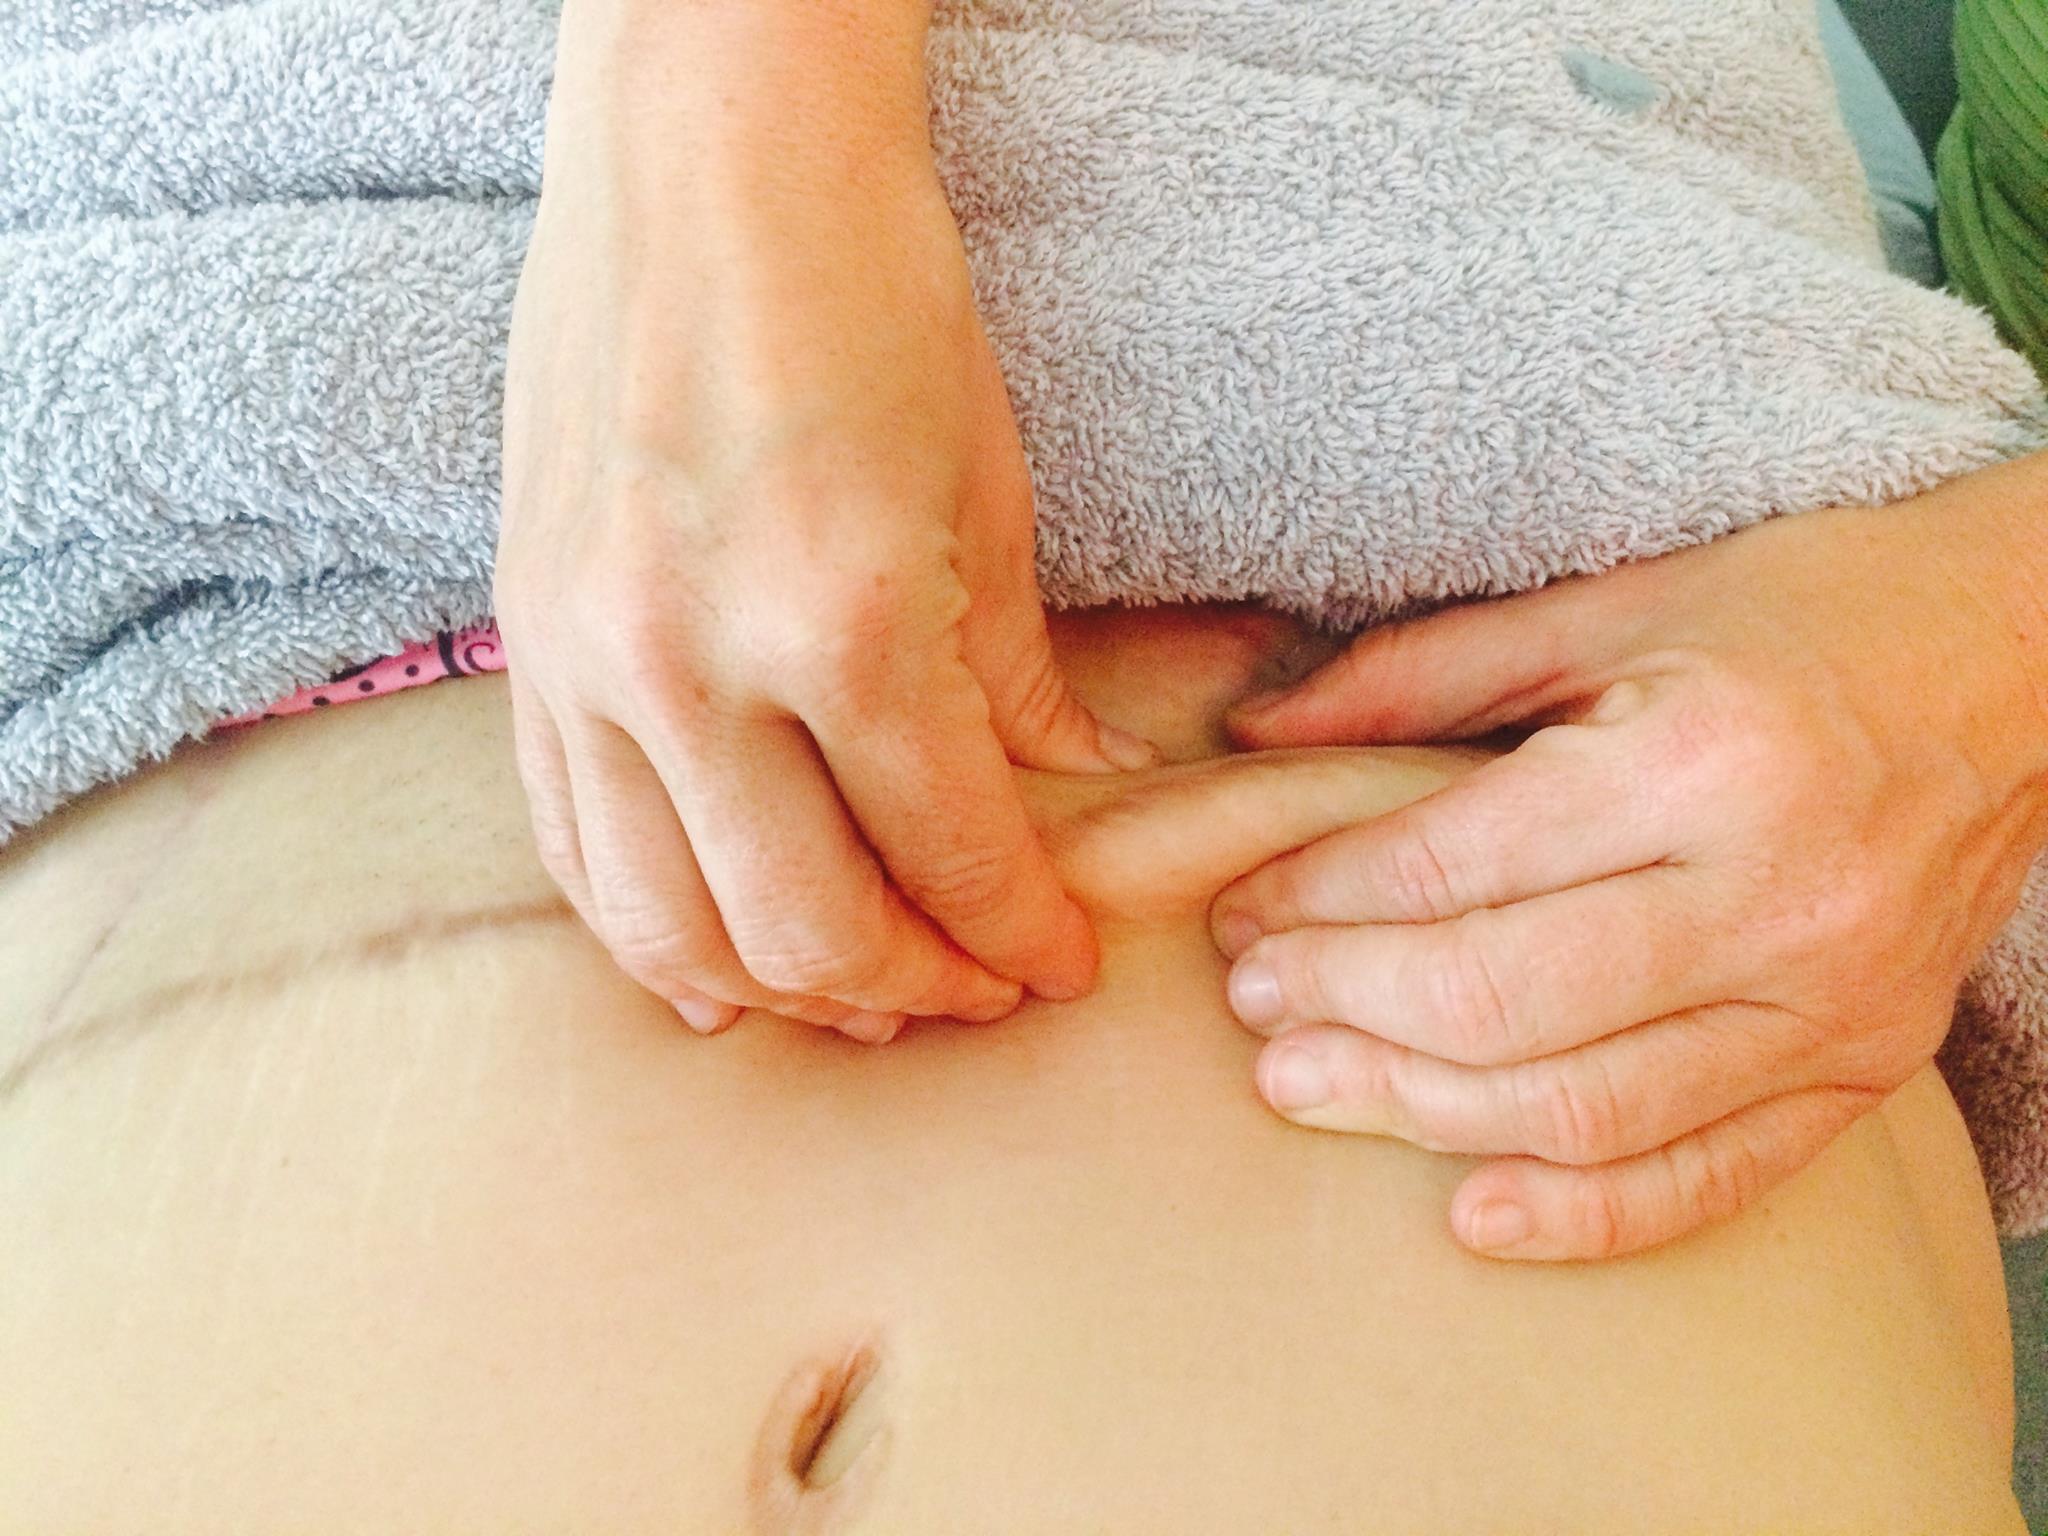 Treating caesarean, hysterectomy and mastectomy scarring with myofascial release and other magical moves